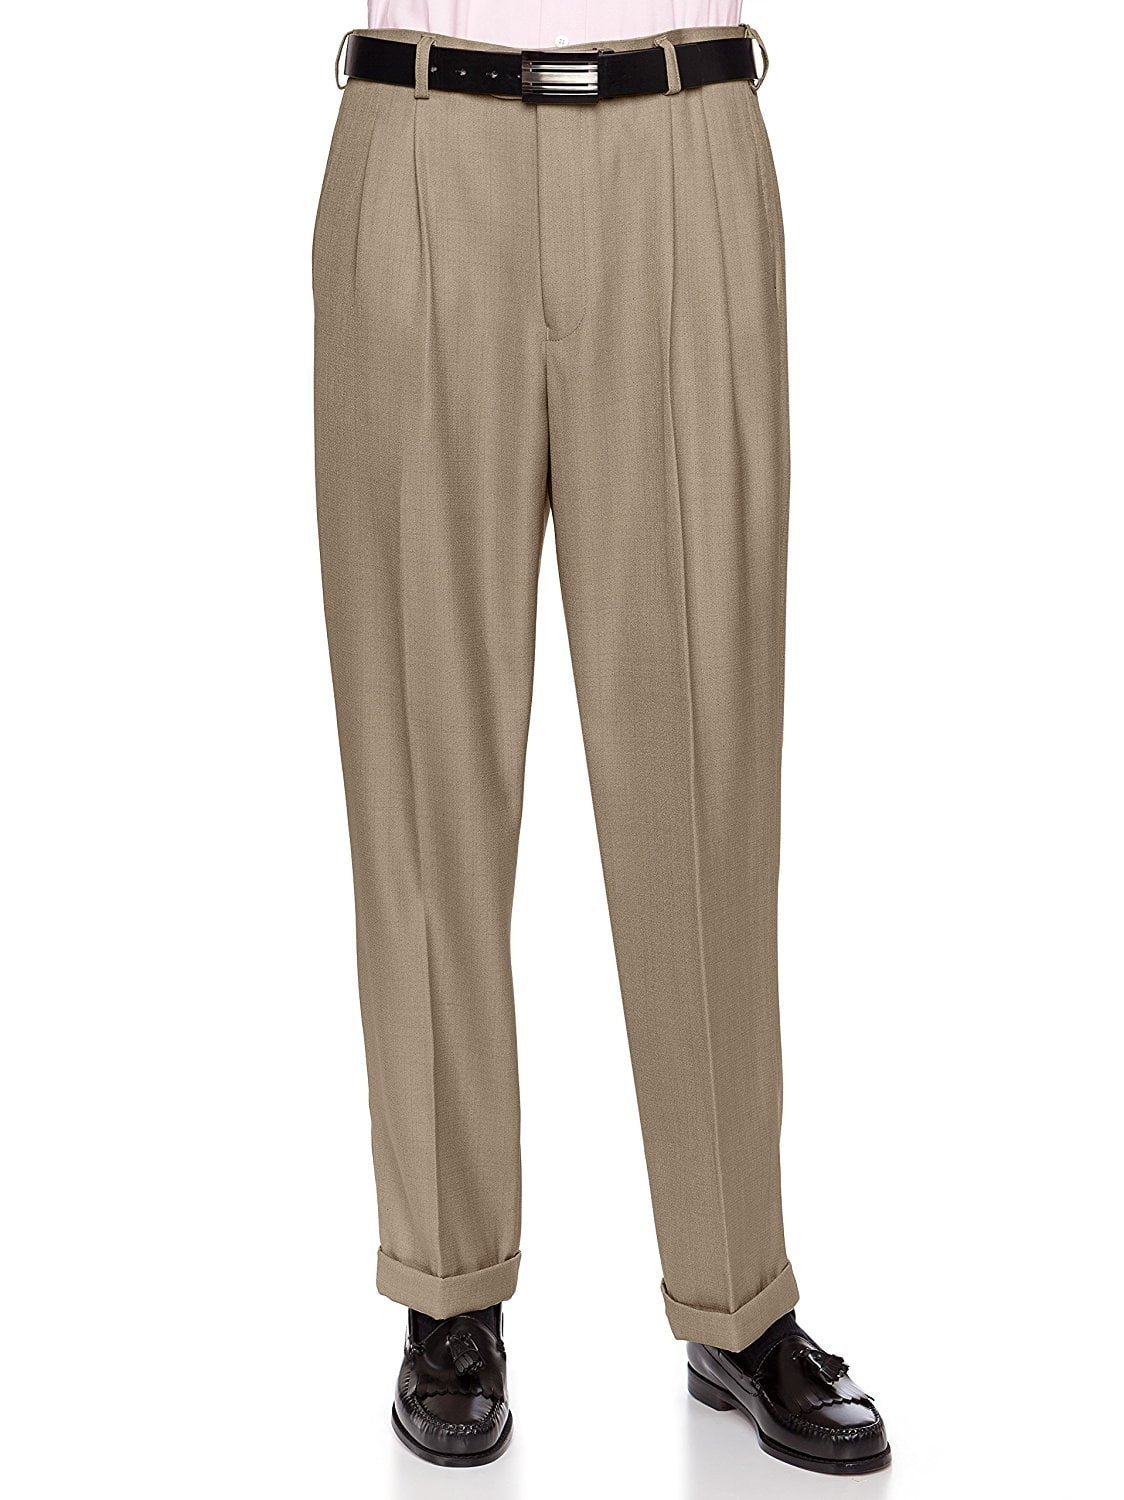 Giovanni Uomo Mens Pleated Front Expandable Waist Dress Pants